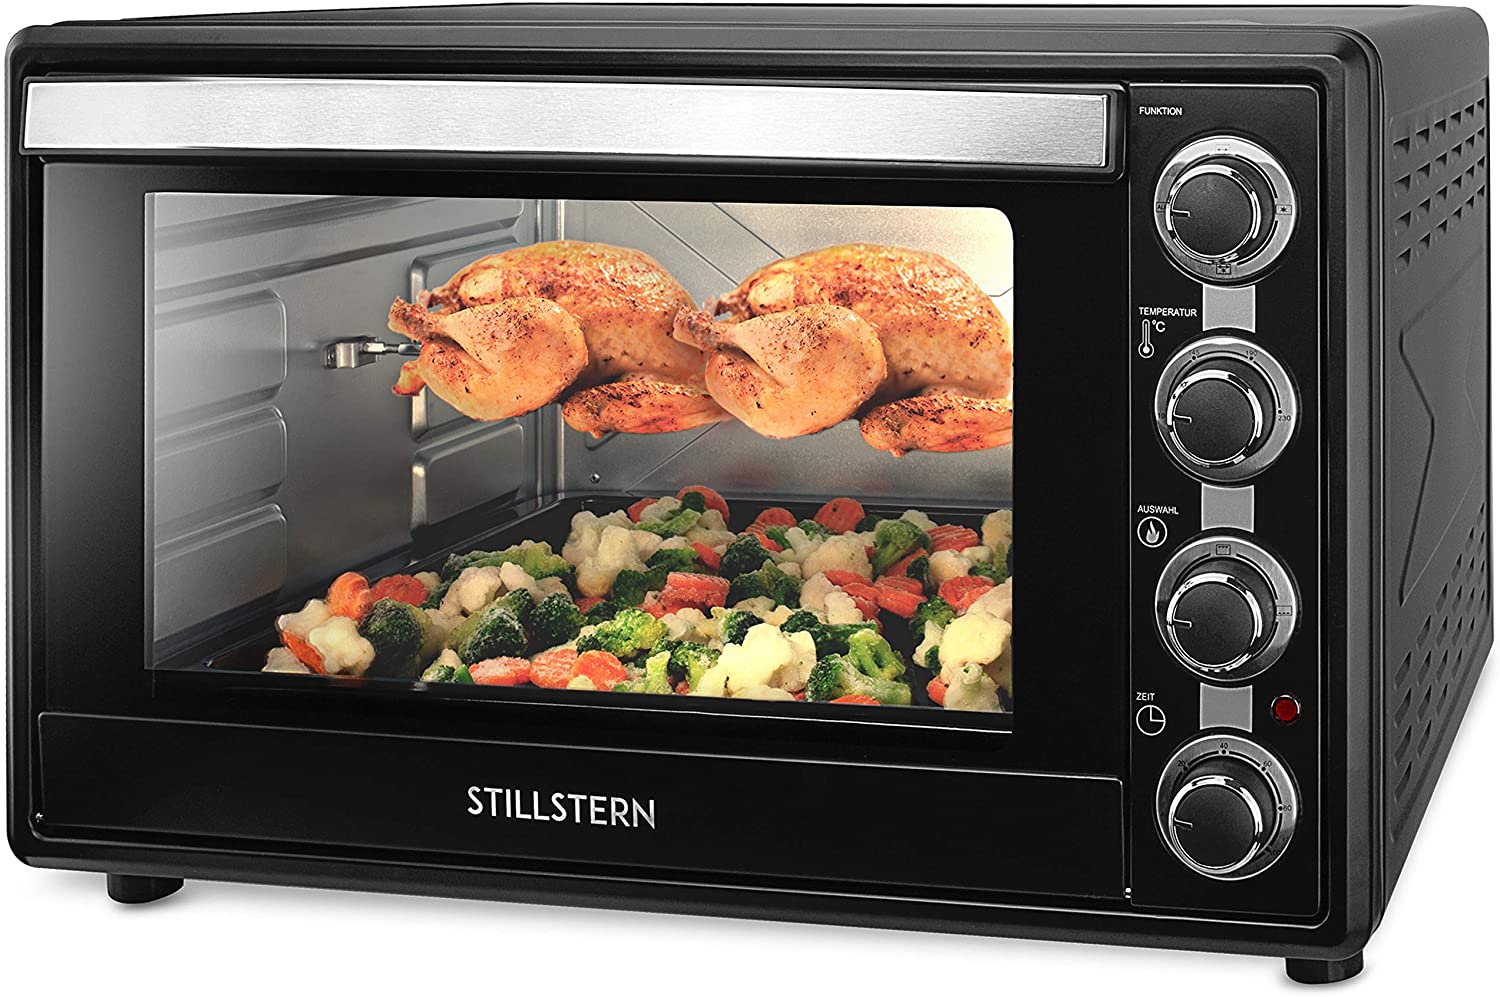 Stillstern Mini Oven with Circulation (60 L) German Version, 2 x Baking Tray, Oven Gloves, Recipe Booklet, Rotisser, Timer, Interior Lighting, 2200 W, Toaster Grill, Pizza Oven, Mini Oven, Ideal for Camping